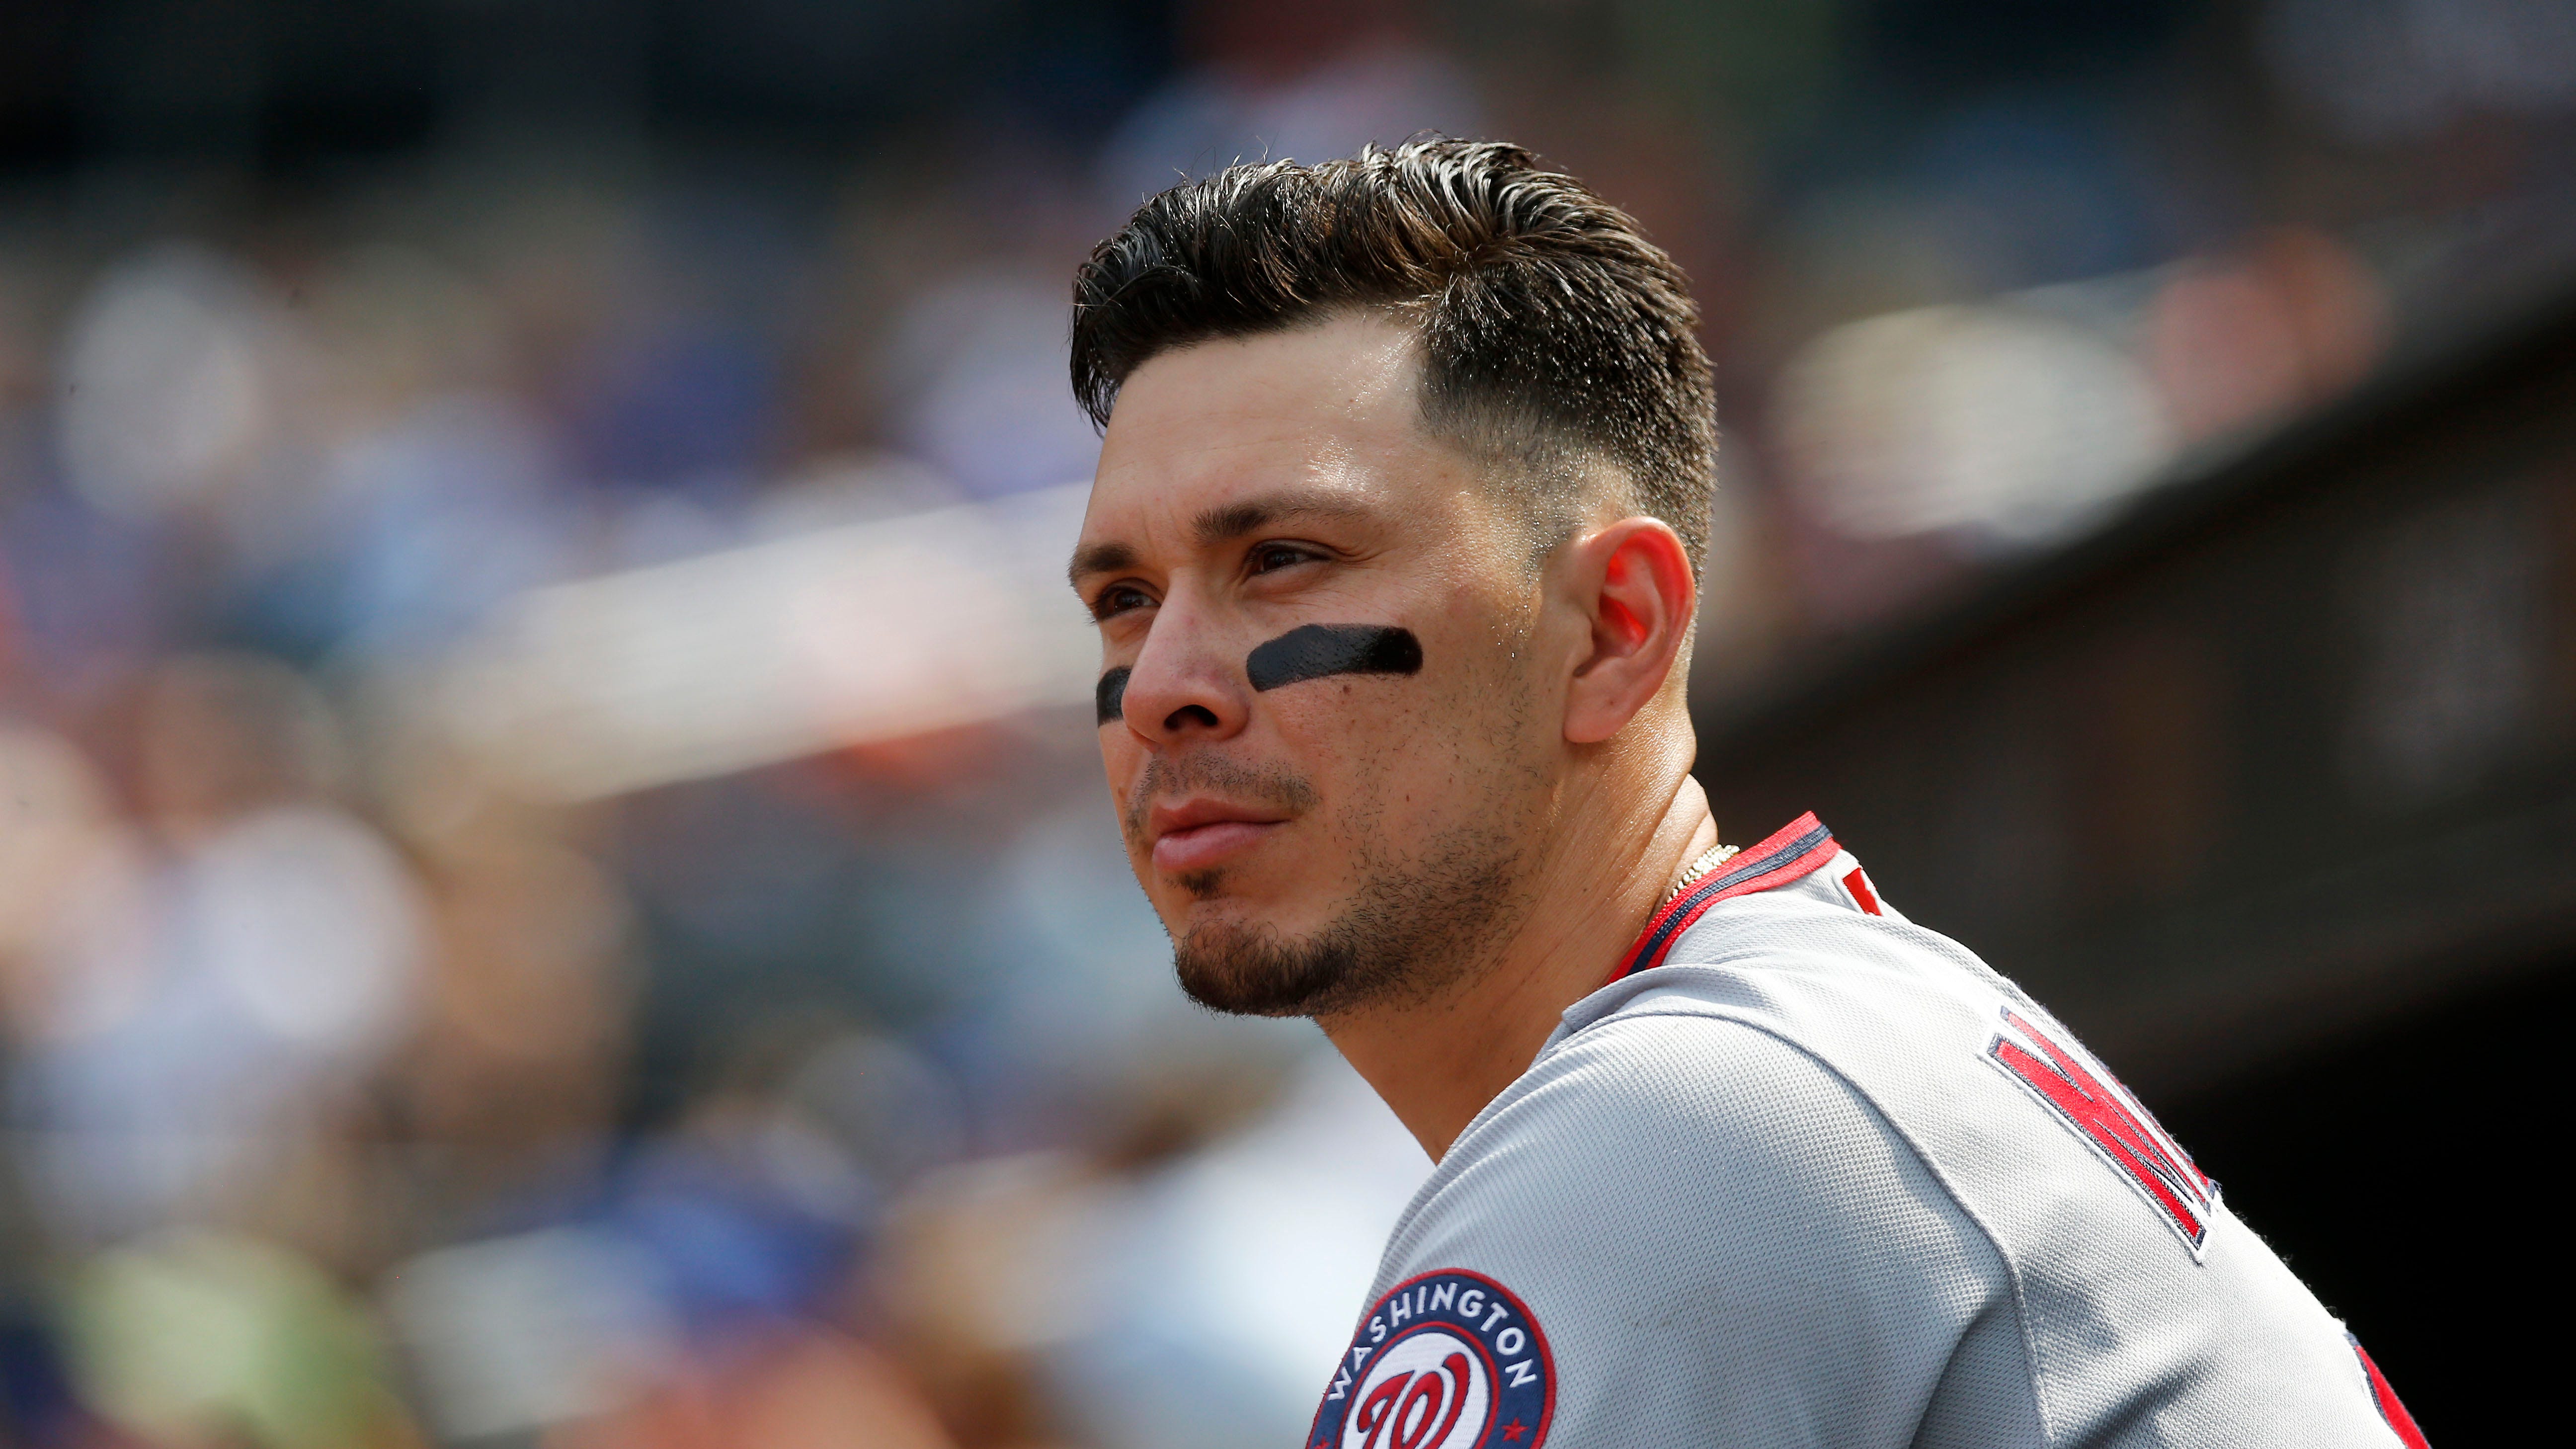 Nationals apologize after Joey Meneses' throw toward young fans